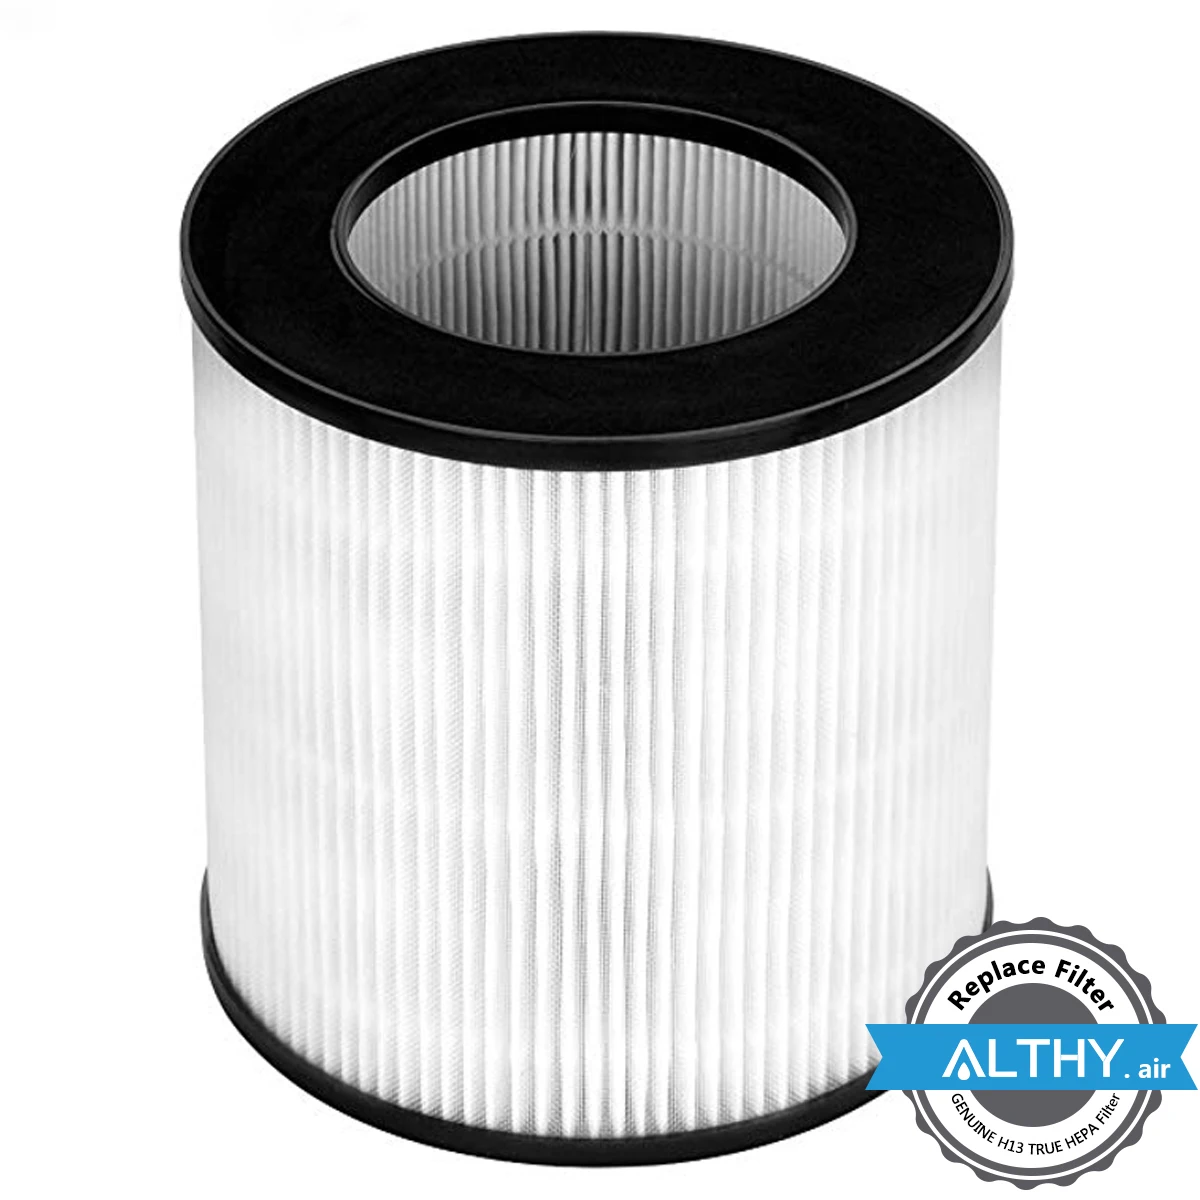 H13 TRUE HEPA Filter Compatible for ALTHY A15 Air Purifier Cleaner Home Allergies Pets , Remove 99.97% Smoke Dust Mold Pollen